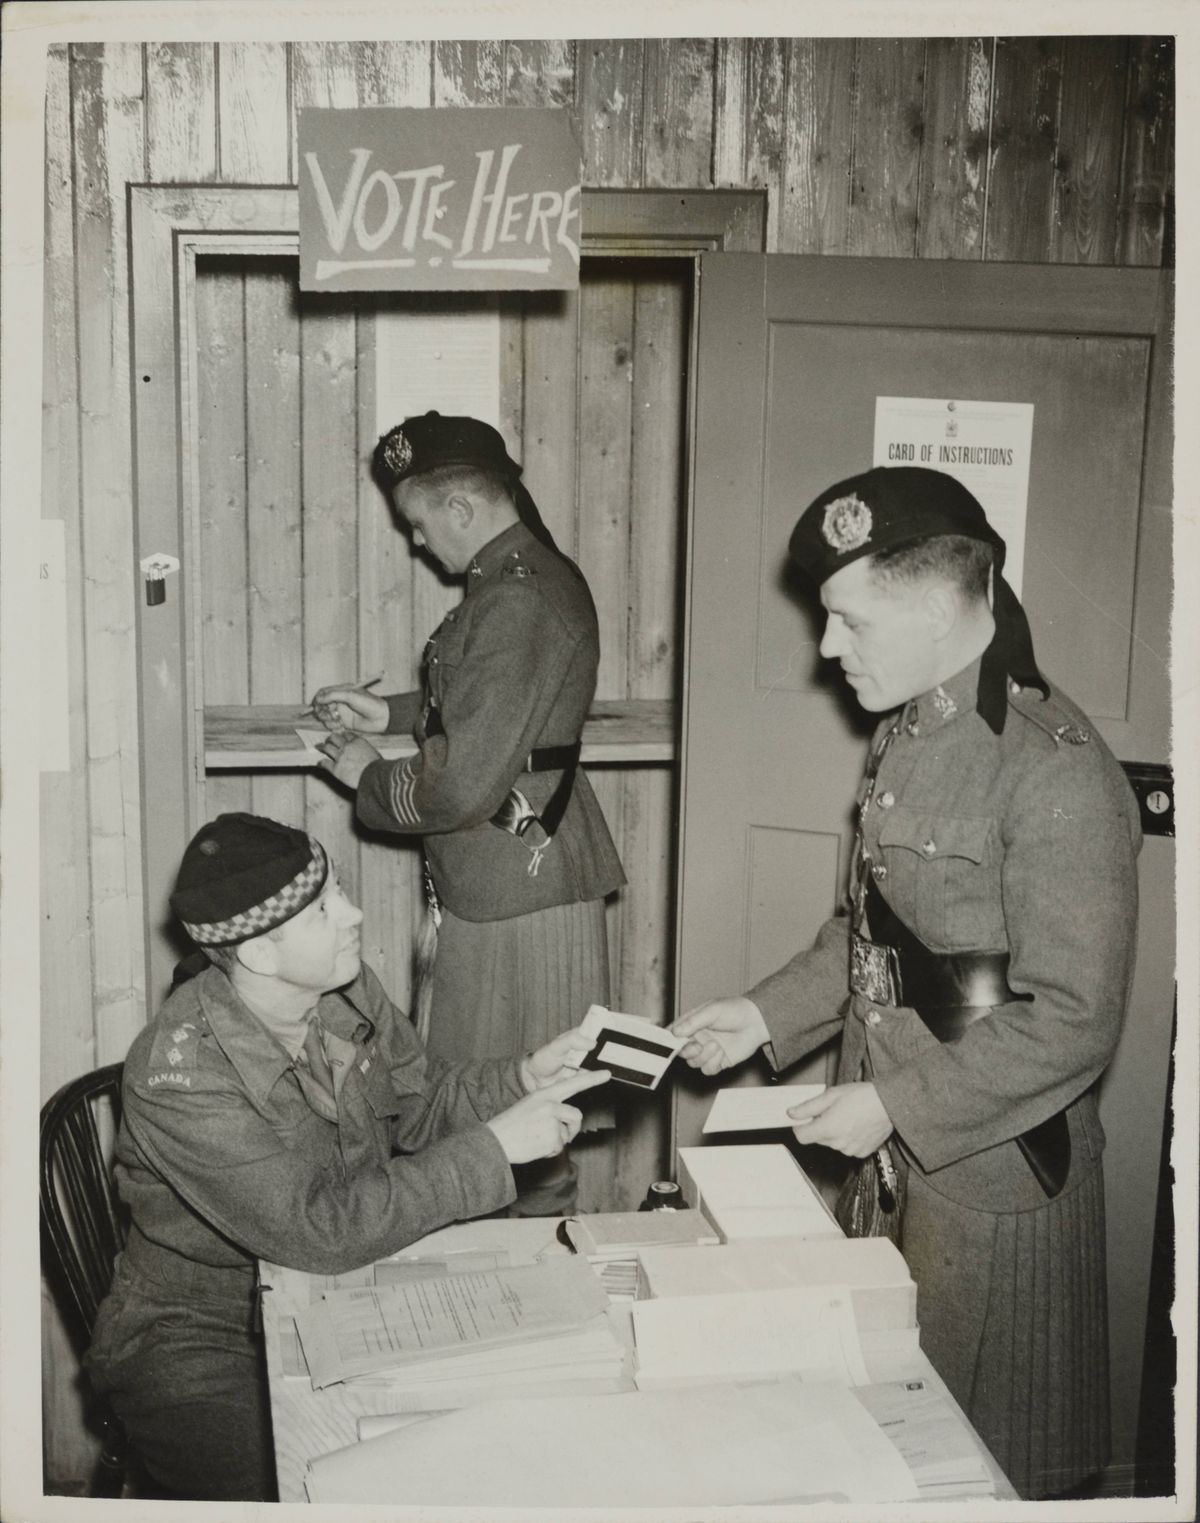 Canadian Soldiers Vote